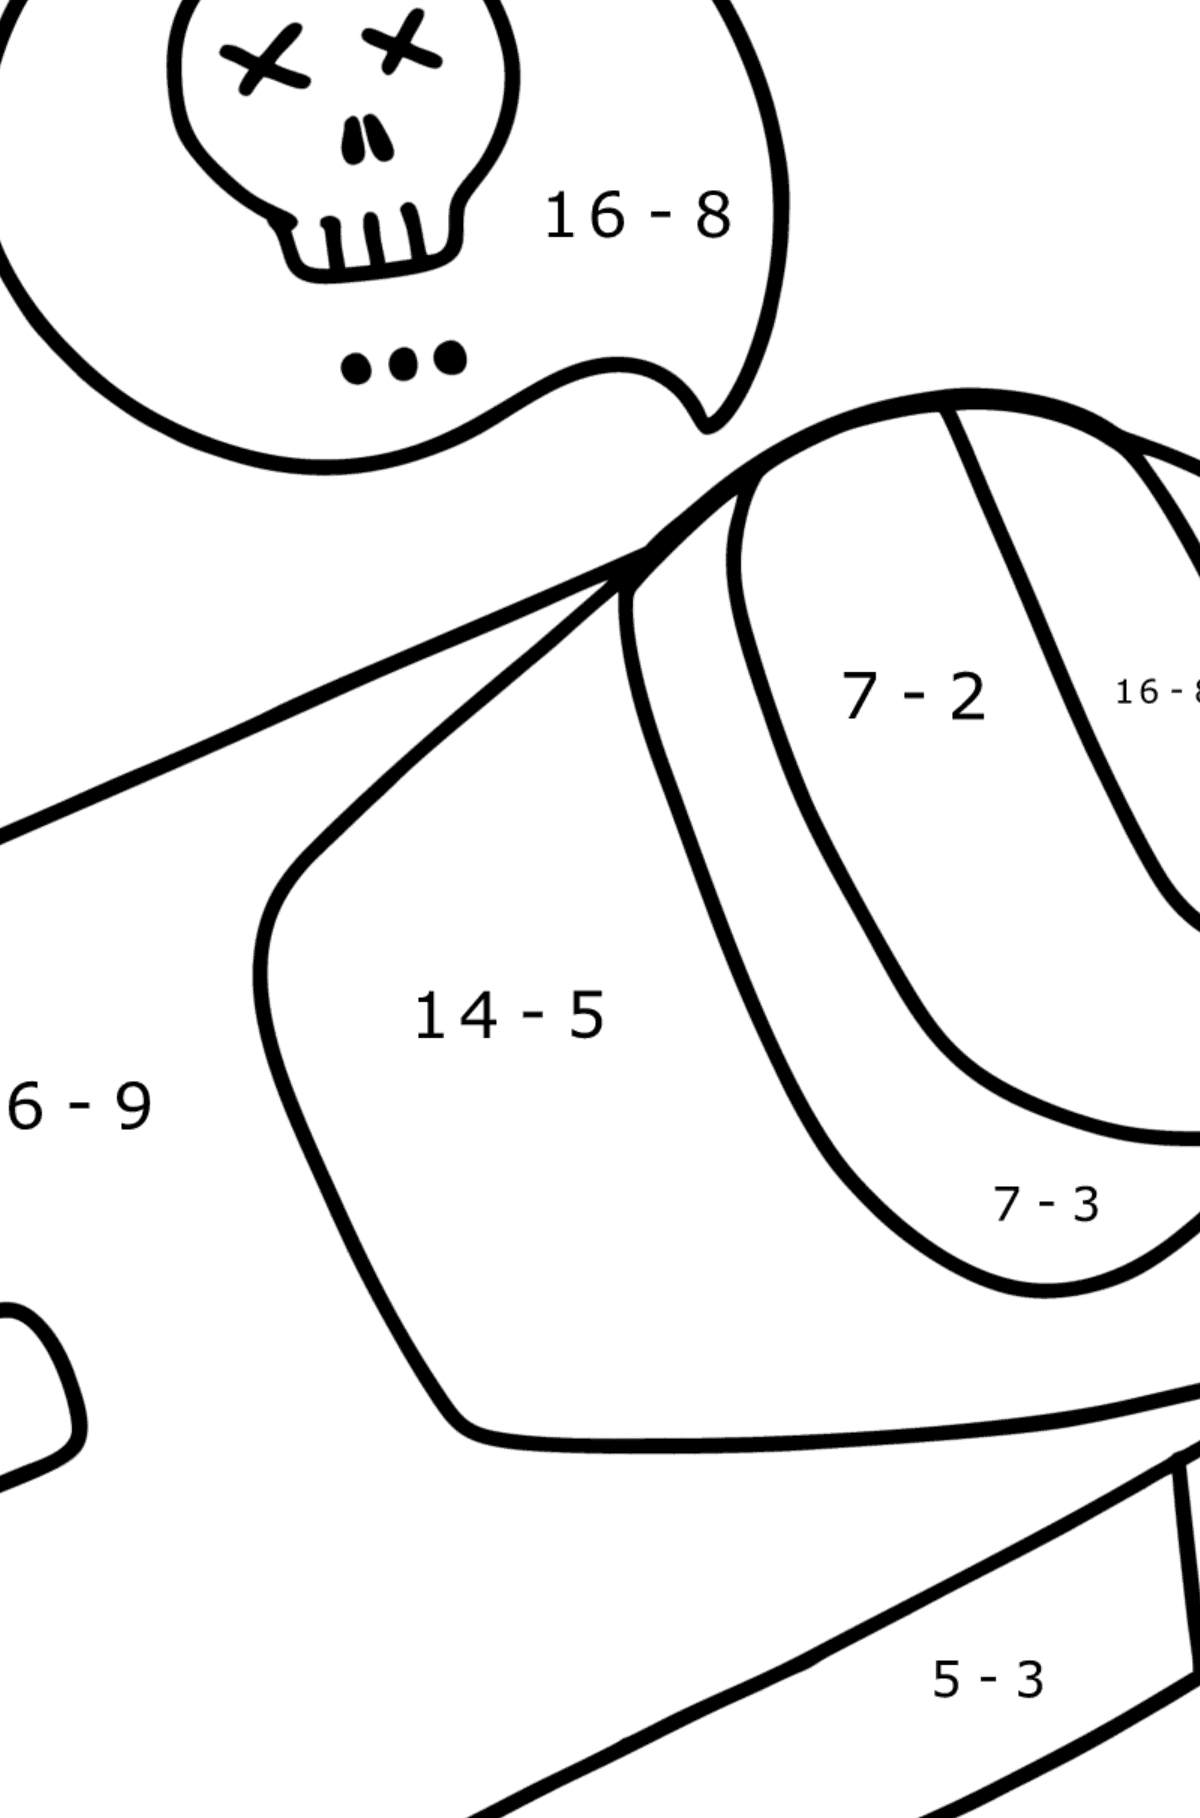 Among Us coloring page Printable - Math Coloring - Subtraction for Kids